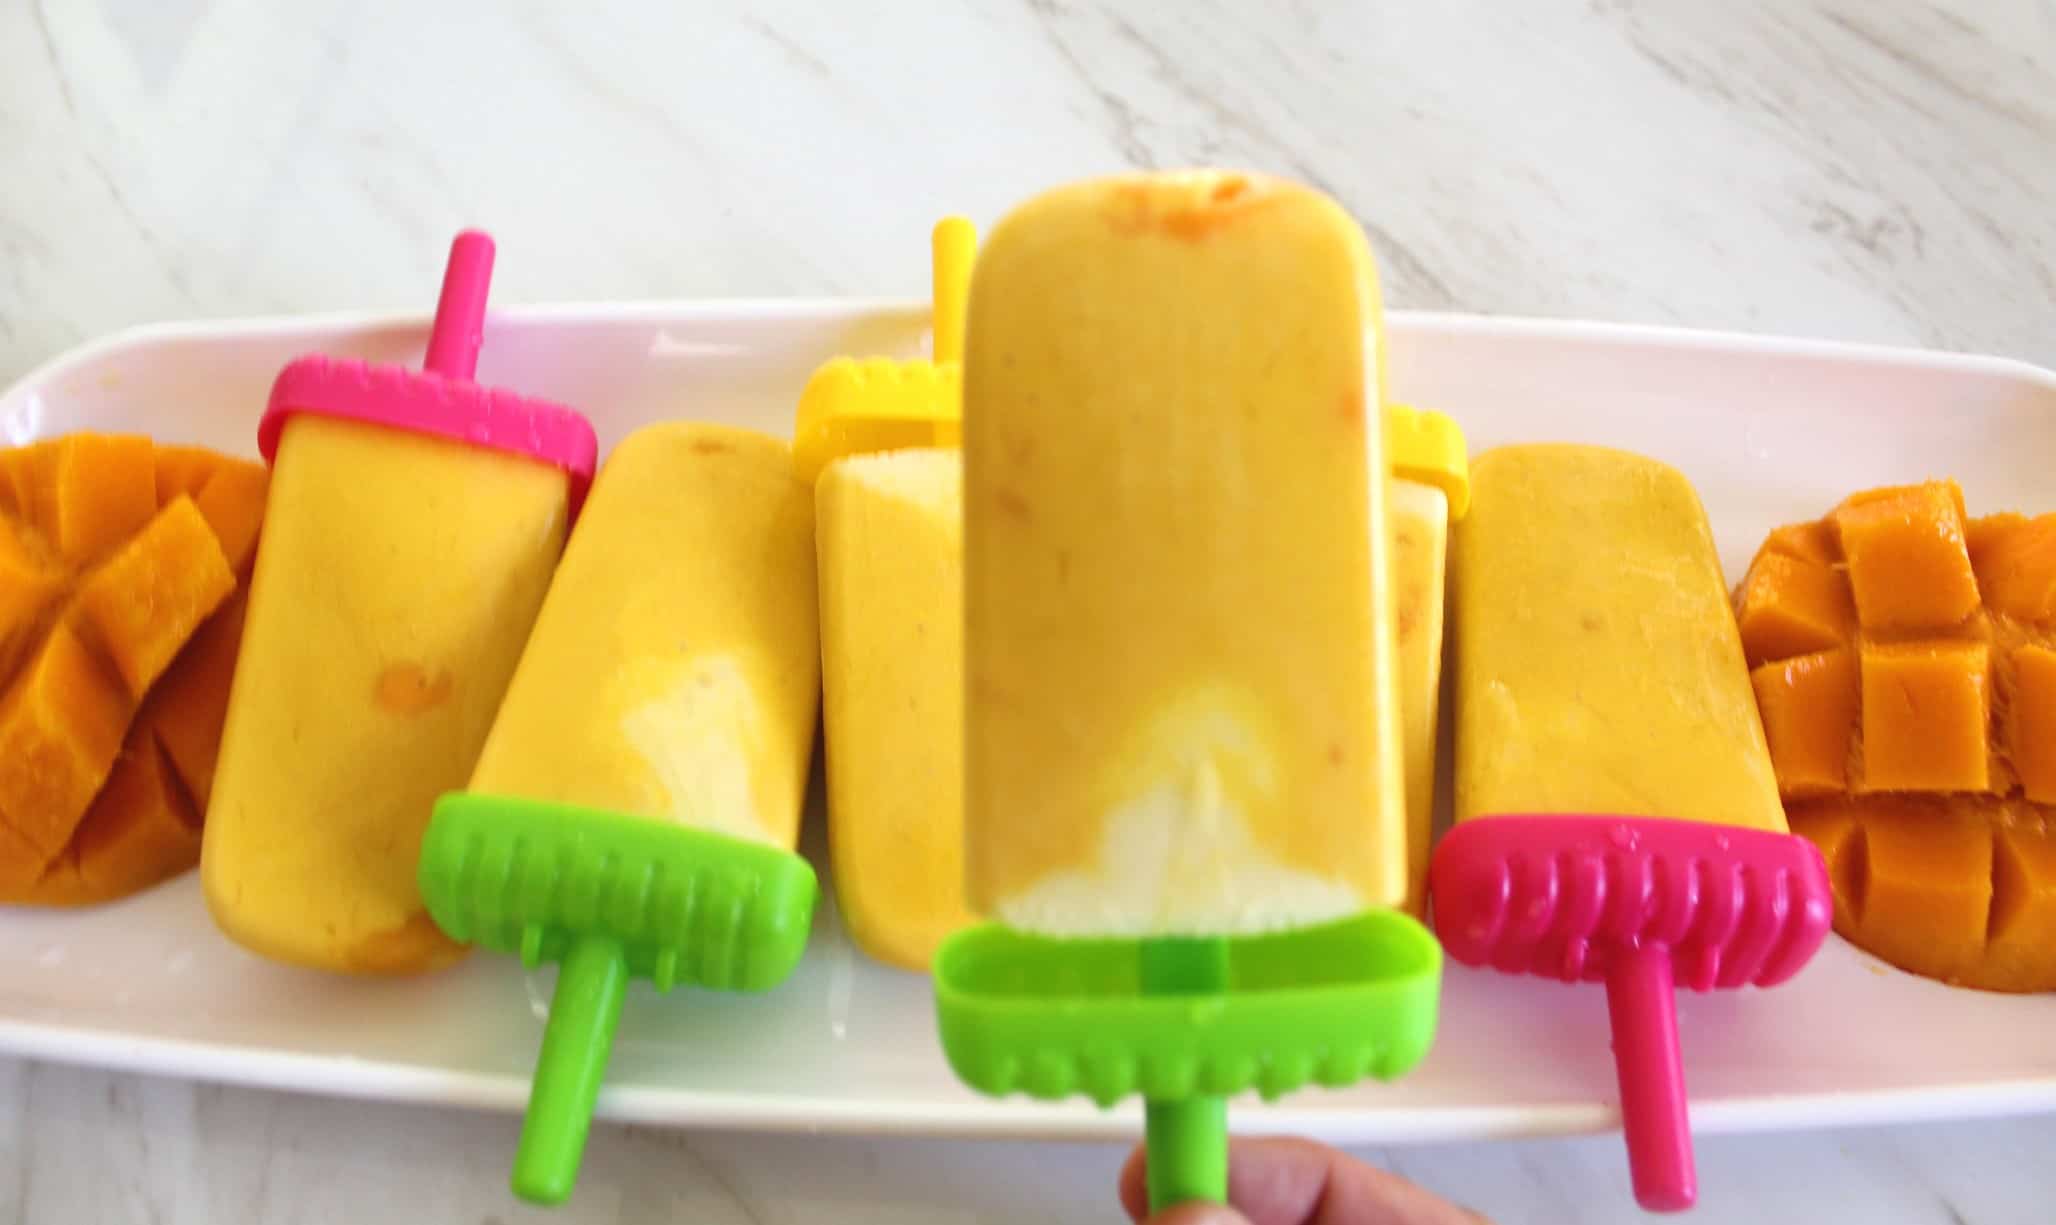 Yummy looking mango popsicles with different color handles laid out in a tray. There's fresh mangoes on both sides of the tray.